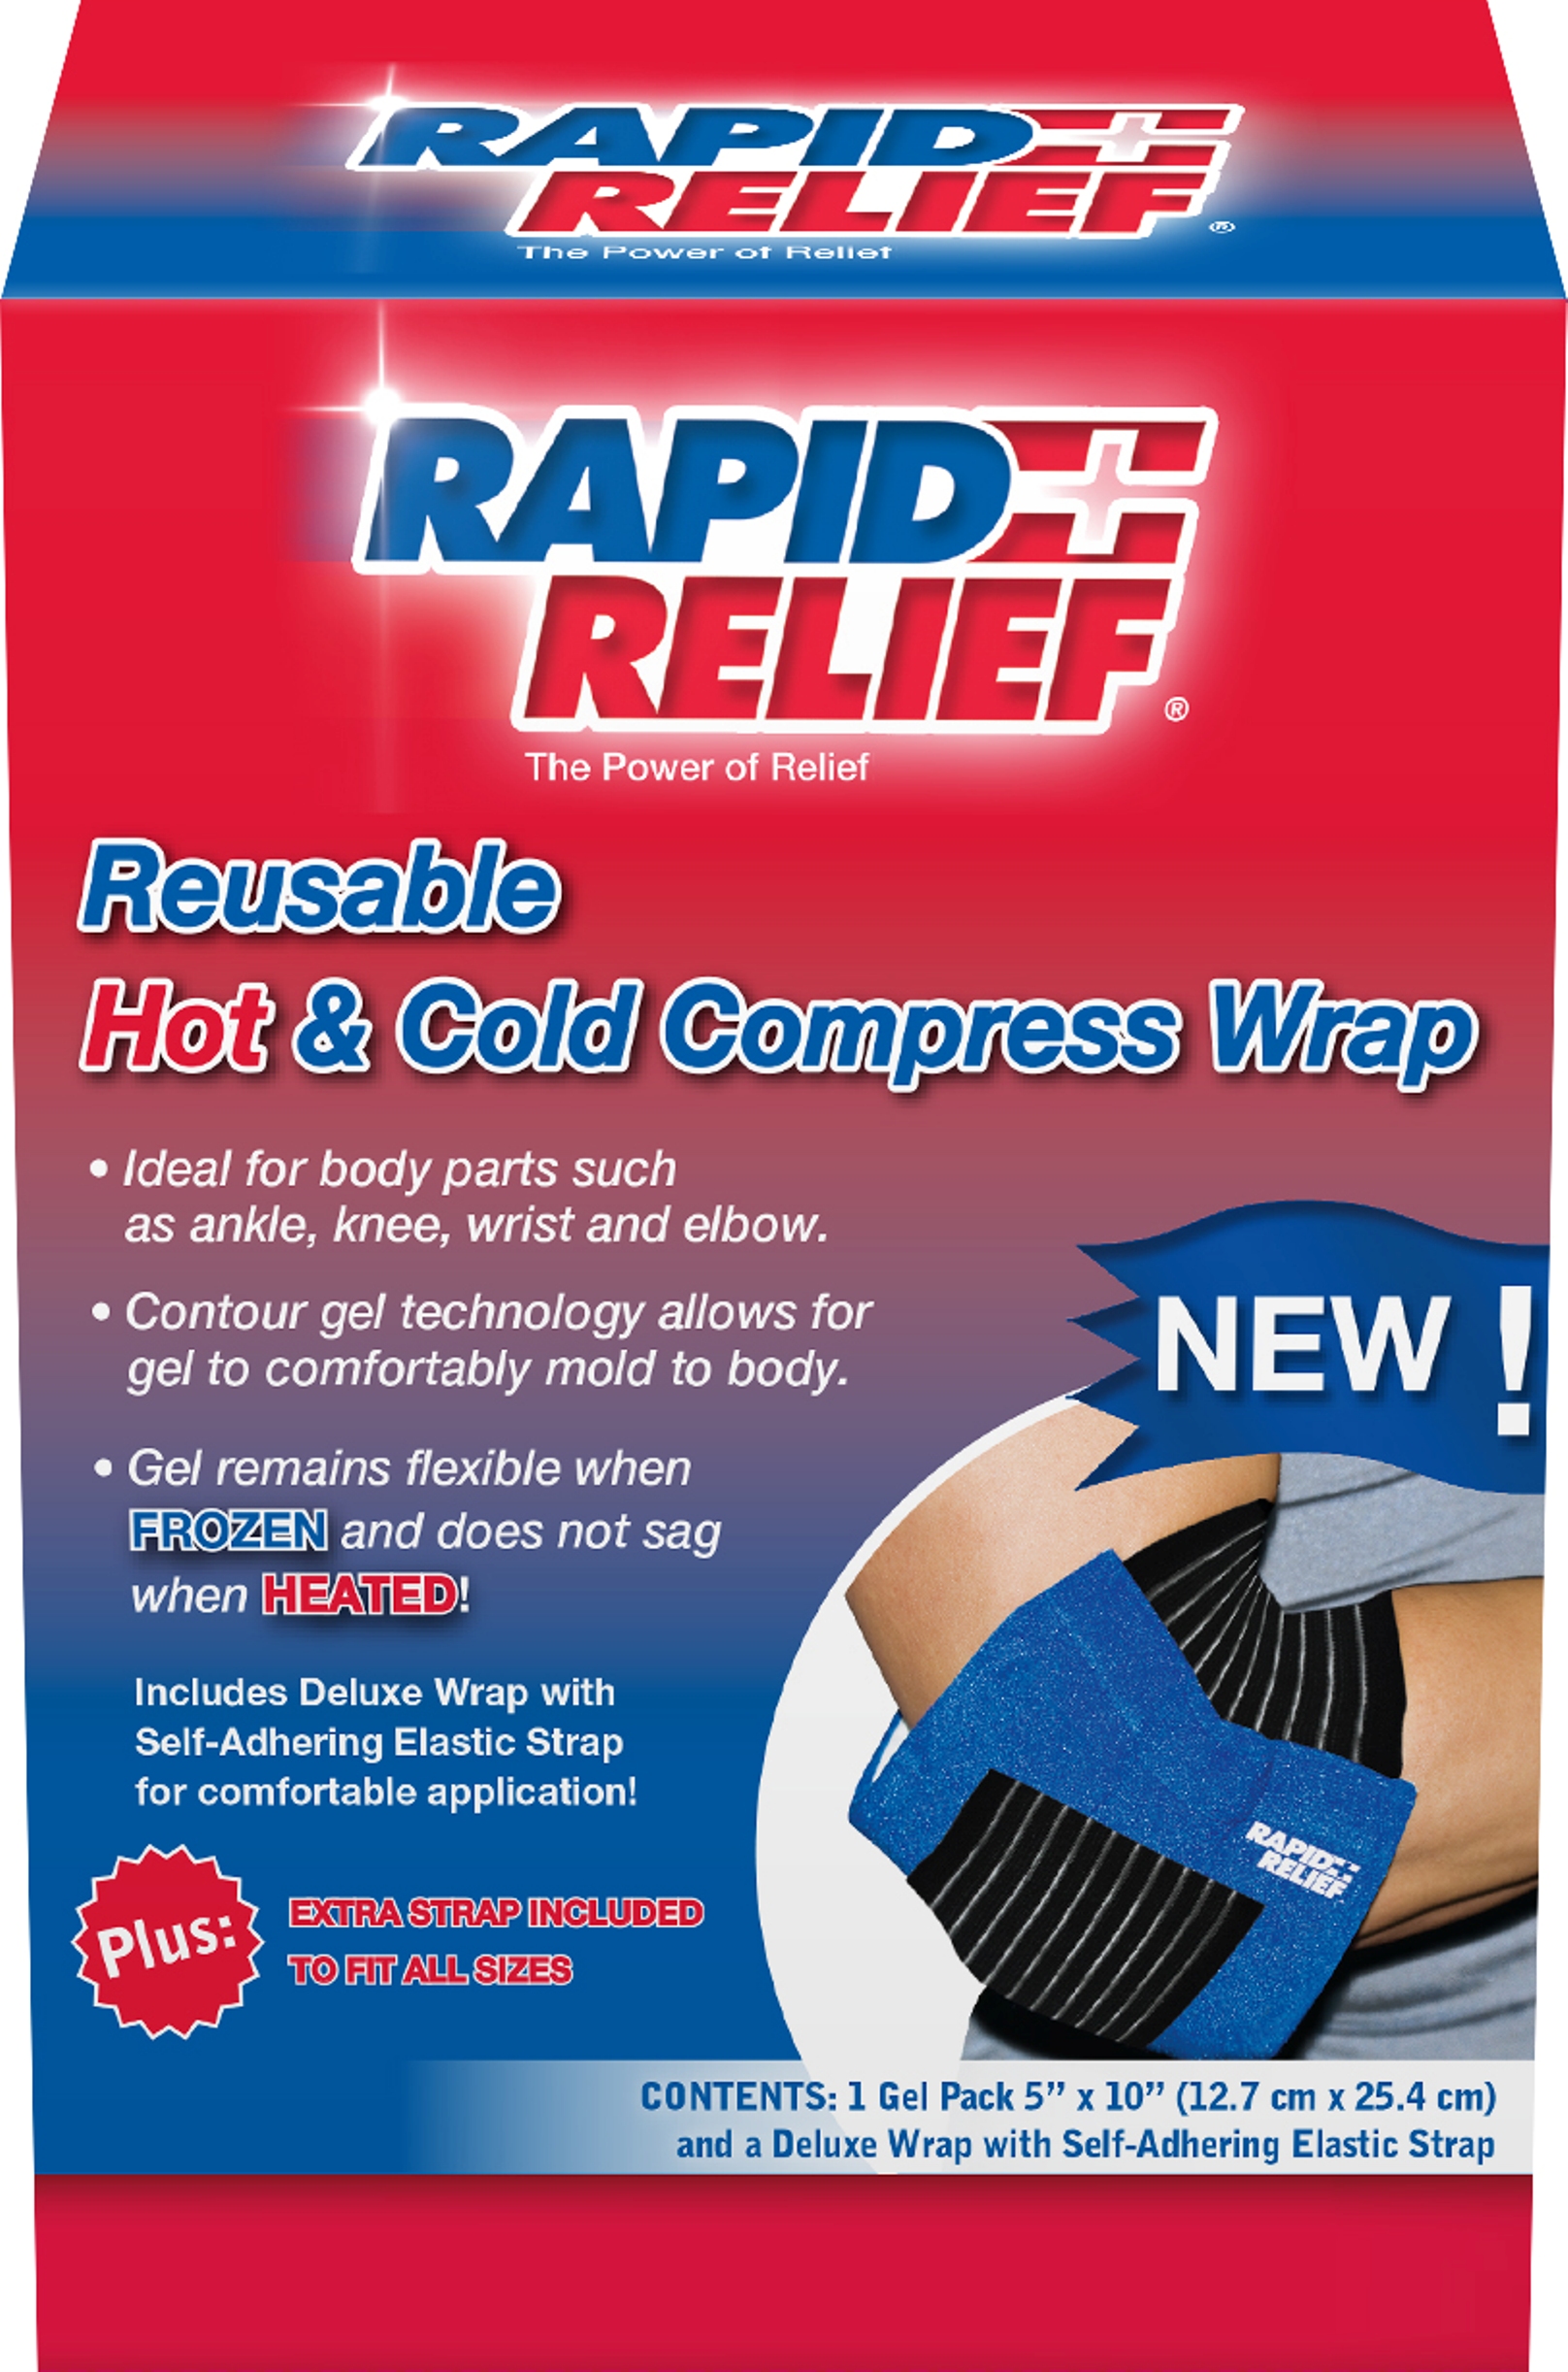 OWN BRAND PACKER Rapid Relief Hot and Cold Deluxe Reusable Univ  1 Ct (12.7 cm x 25.4 cm)